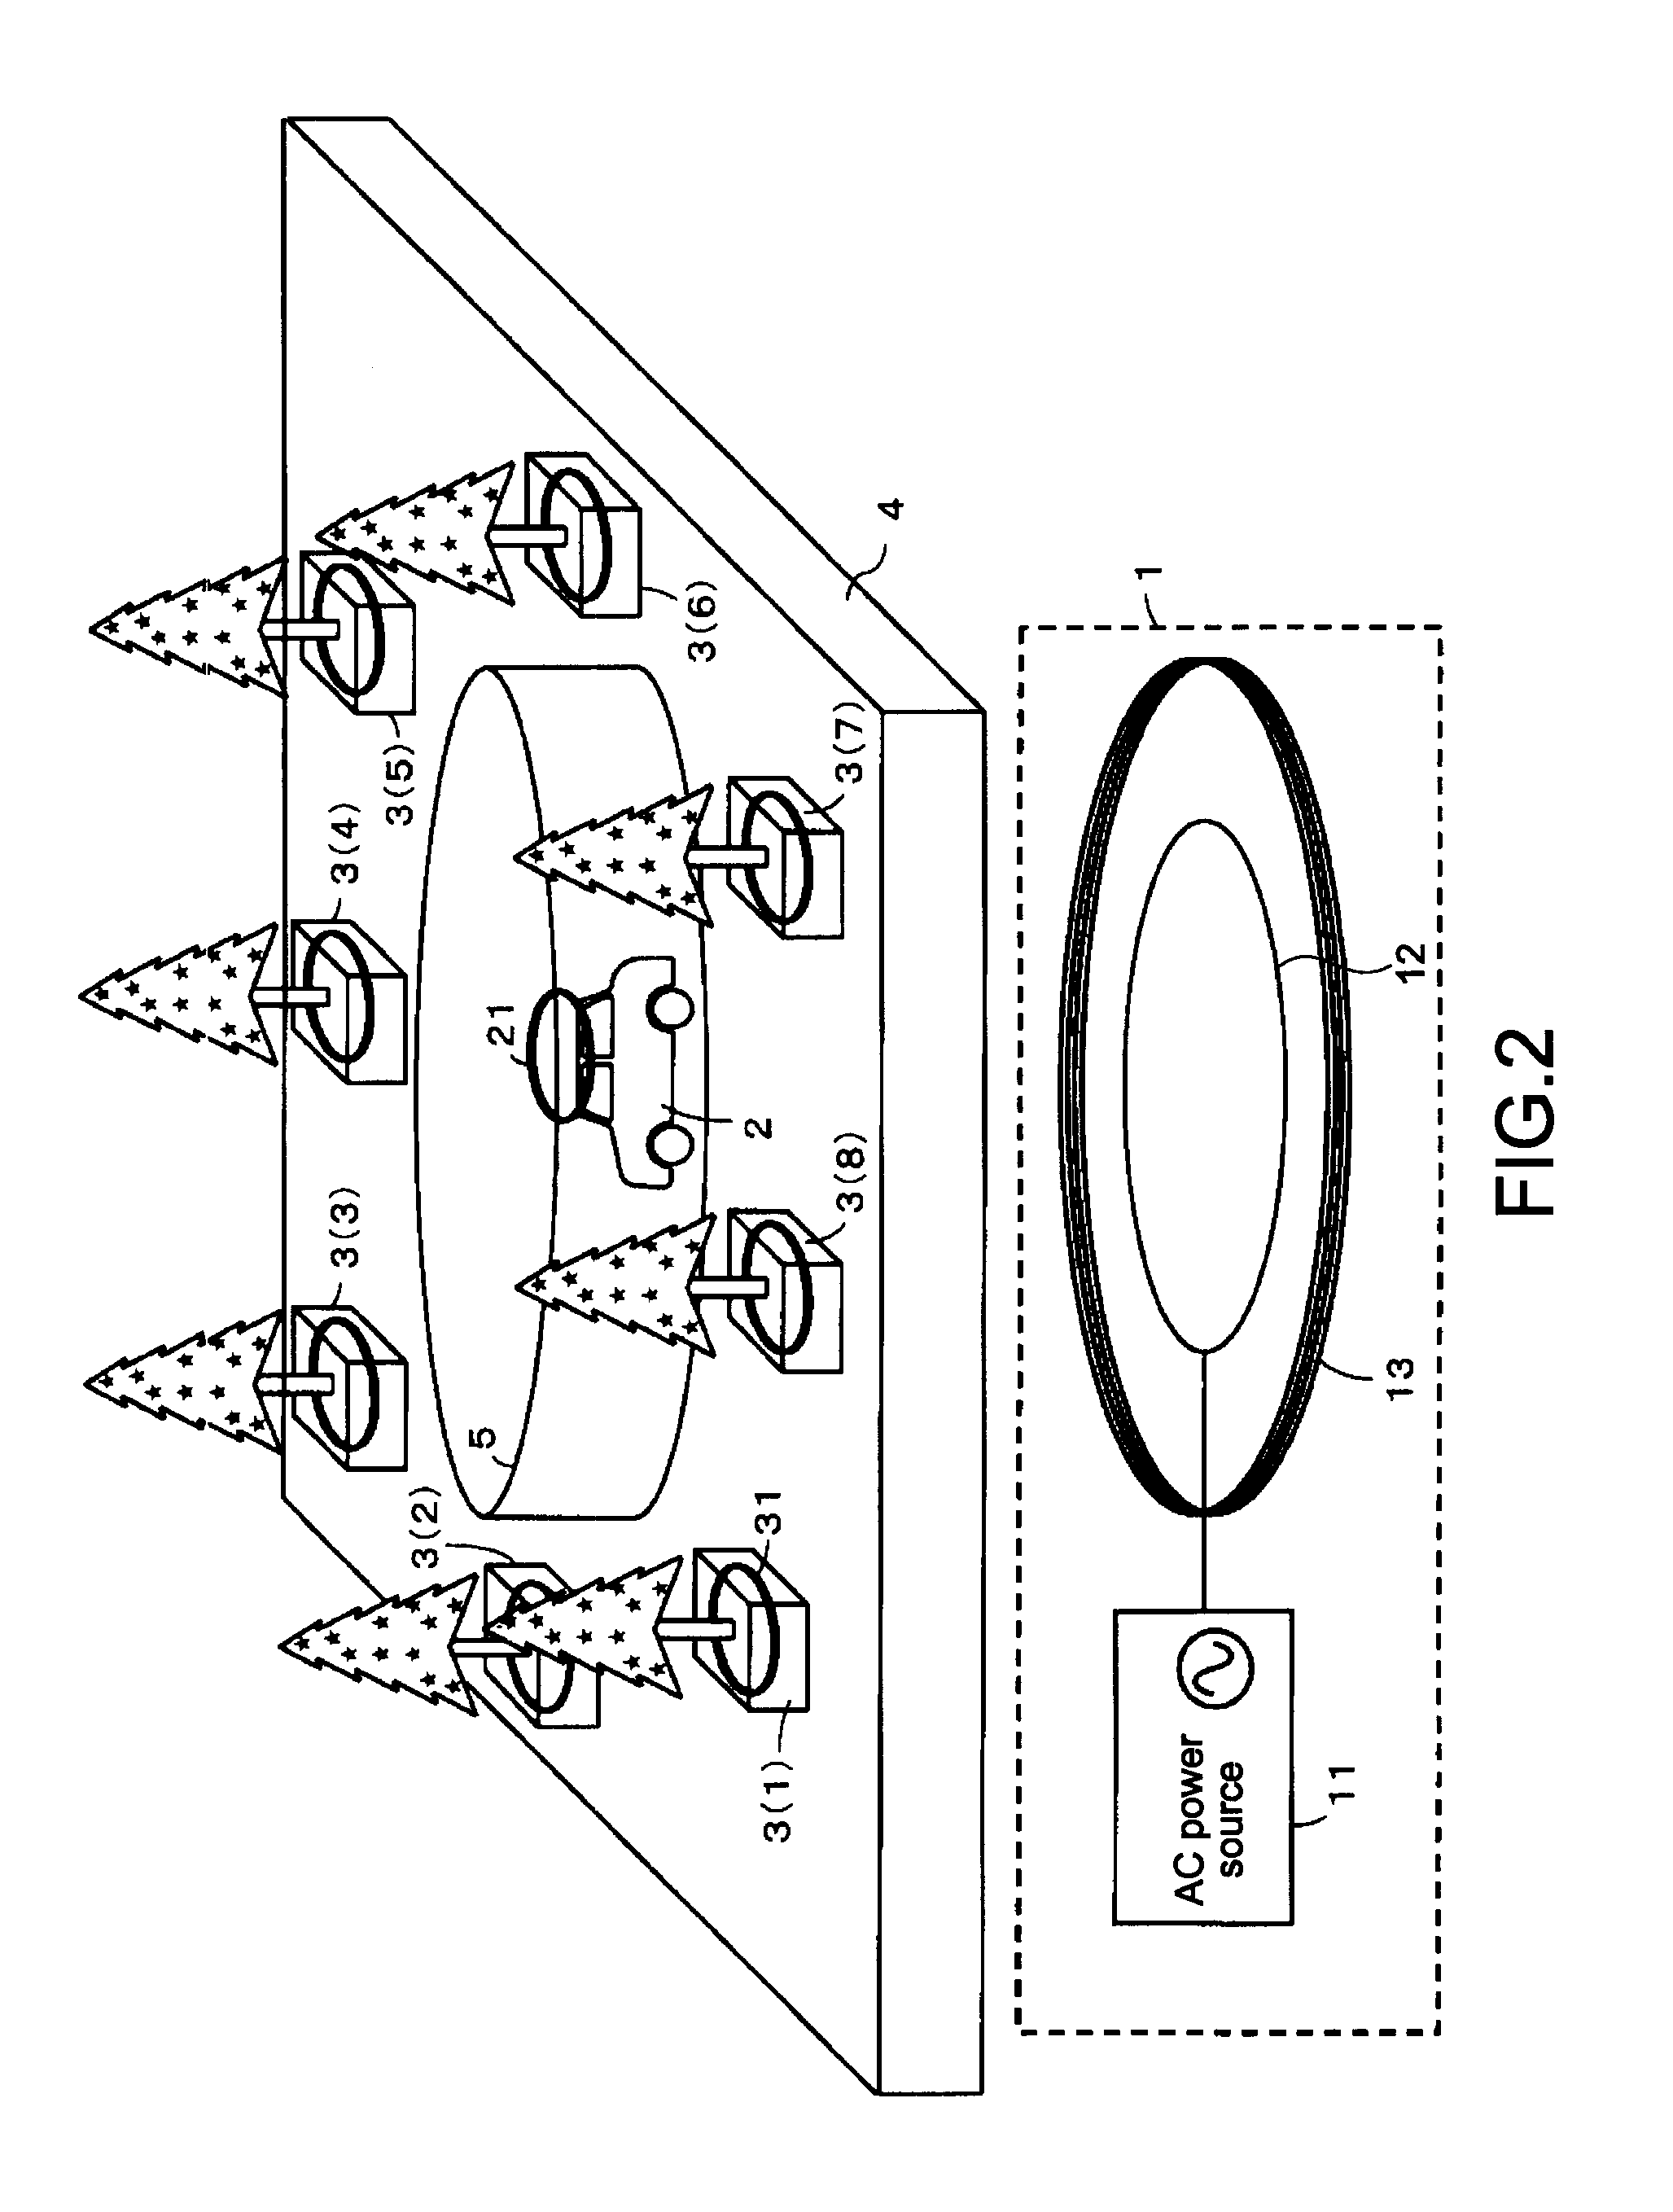 Noncontact power feed system, noncontact relay apparatus, noncontact power reception apparatus, and noncontact power feed method